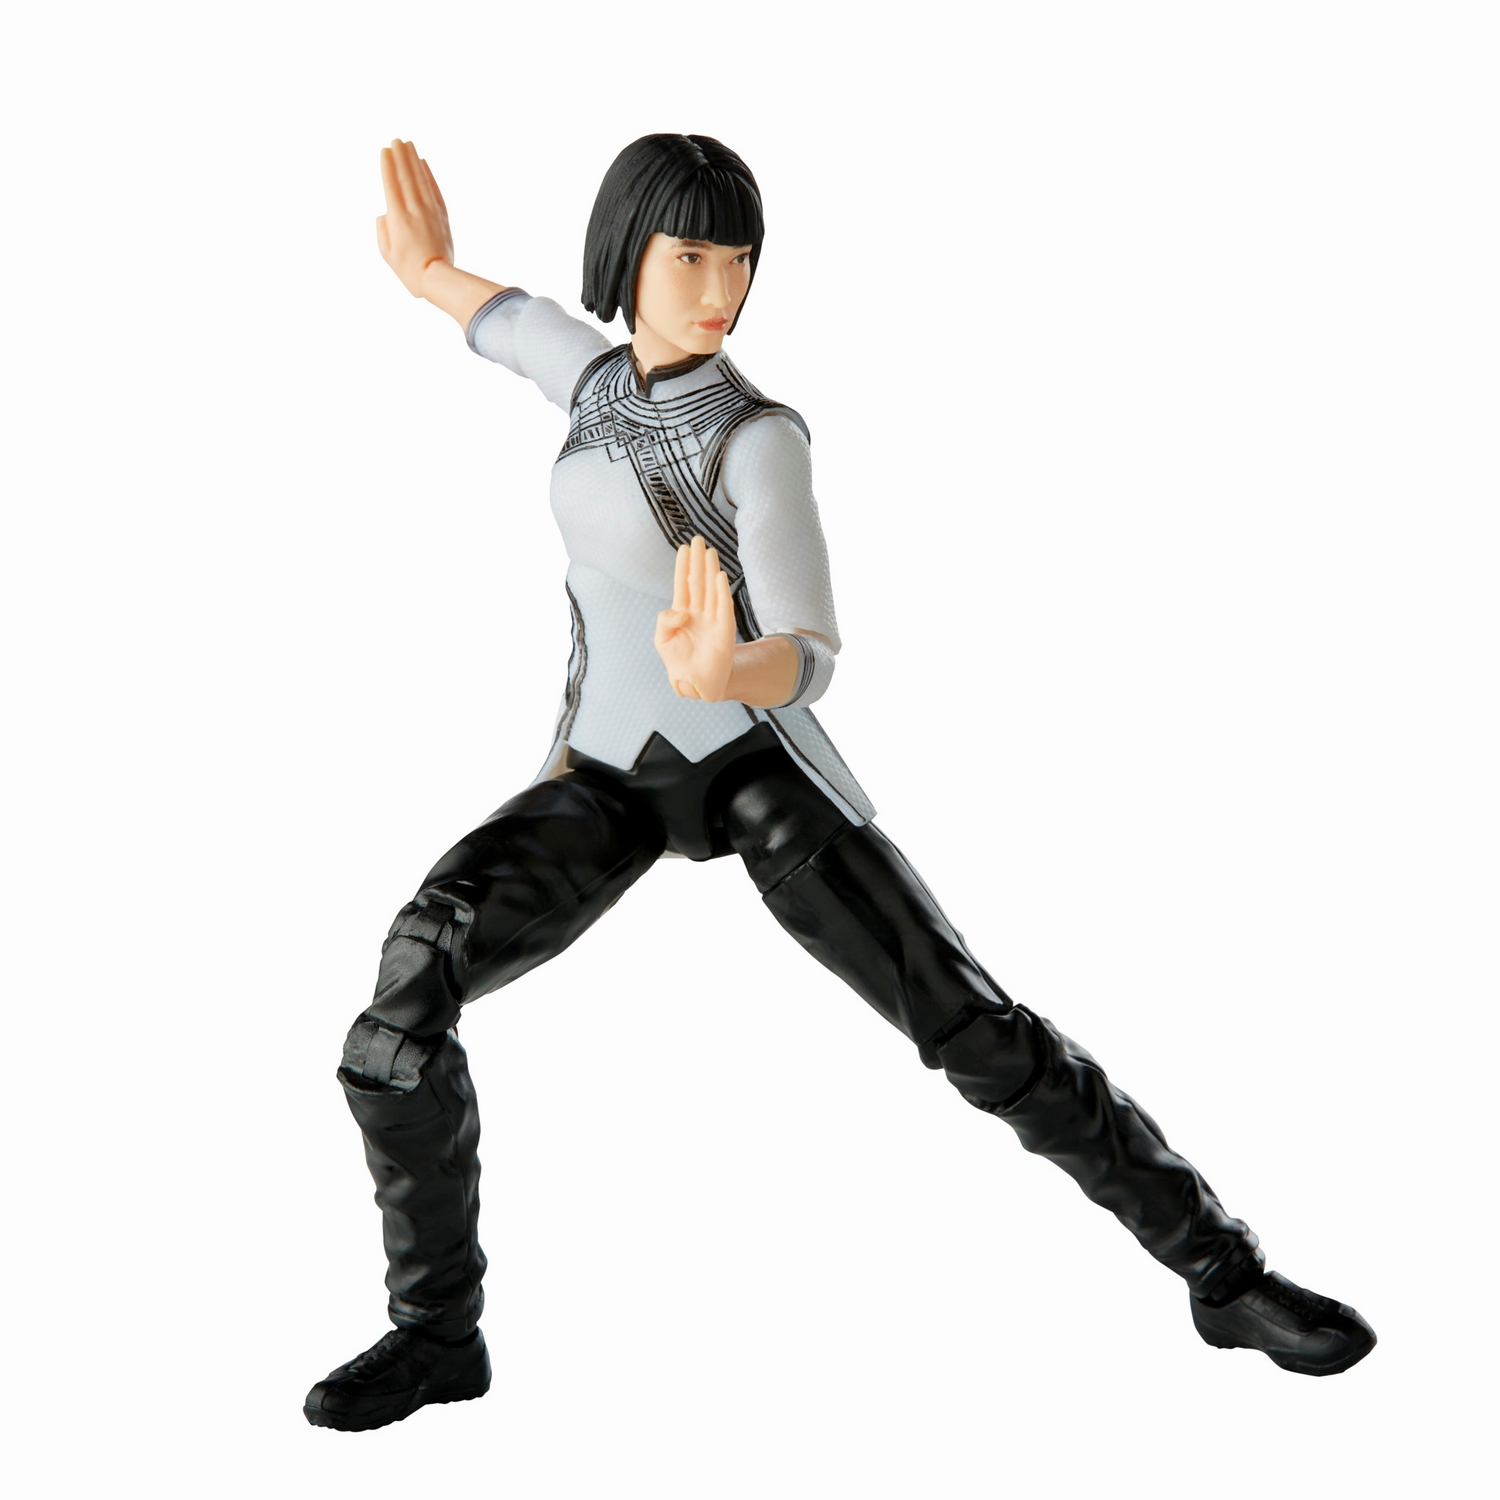 MARVEL LEGENDS SERIES 6-INCH SHANG-CHI AND THE LEGEND OF THE TEN RINGS - Xialing oop6.jpg